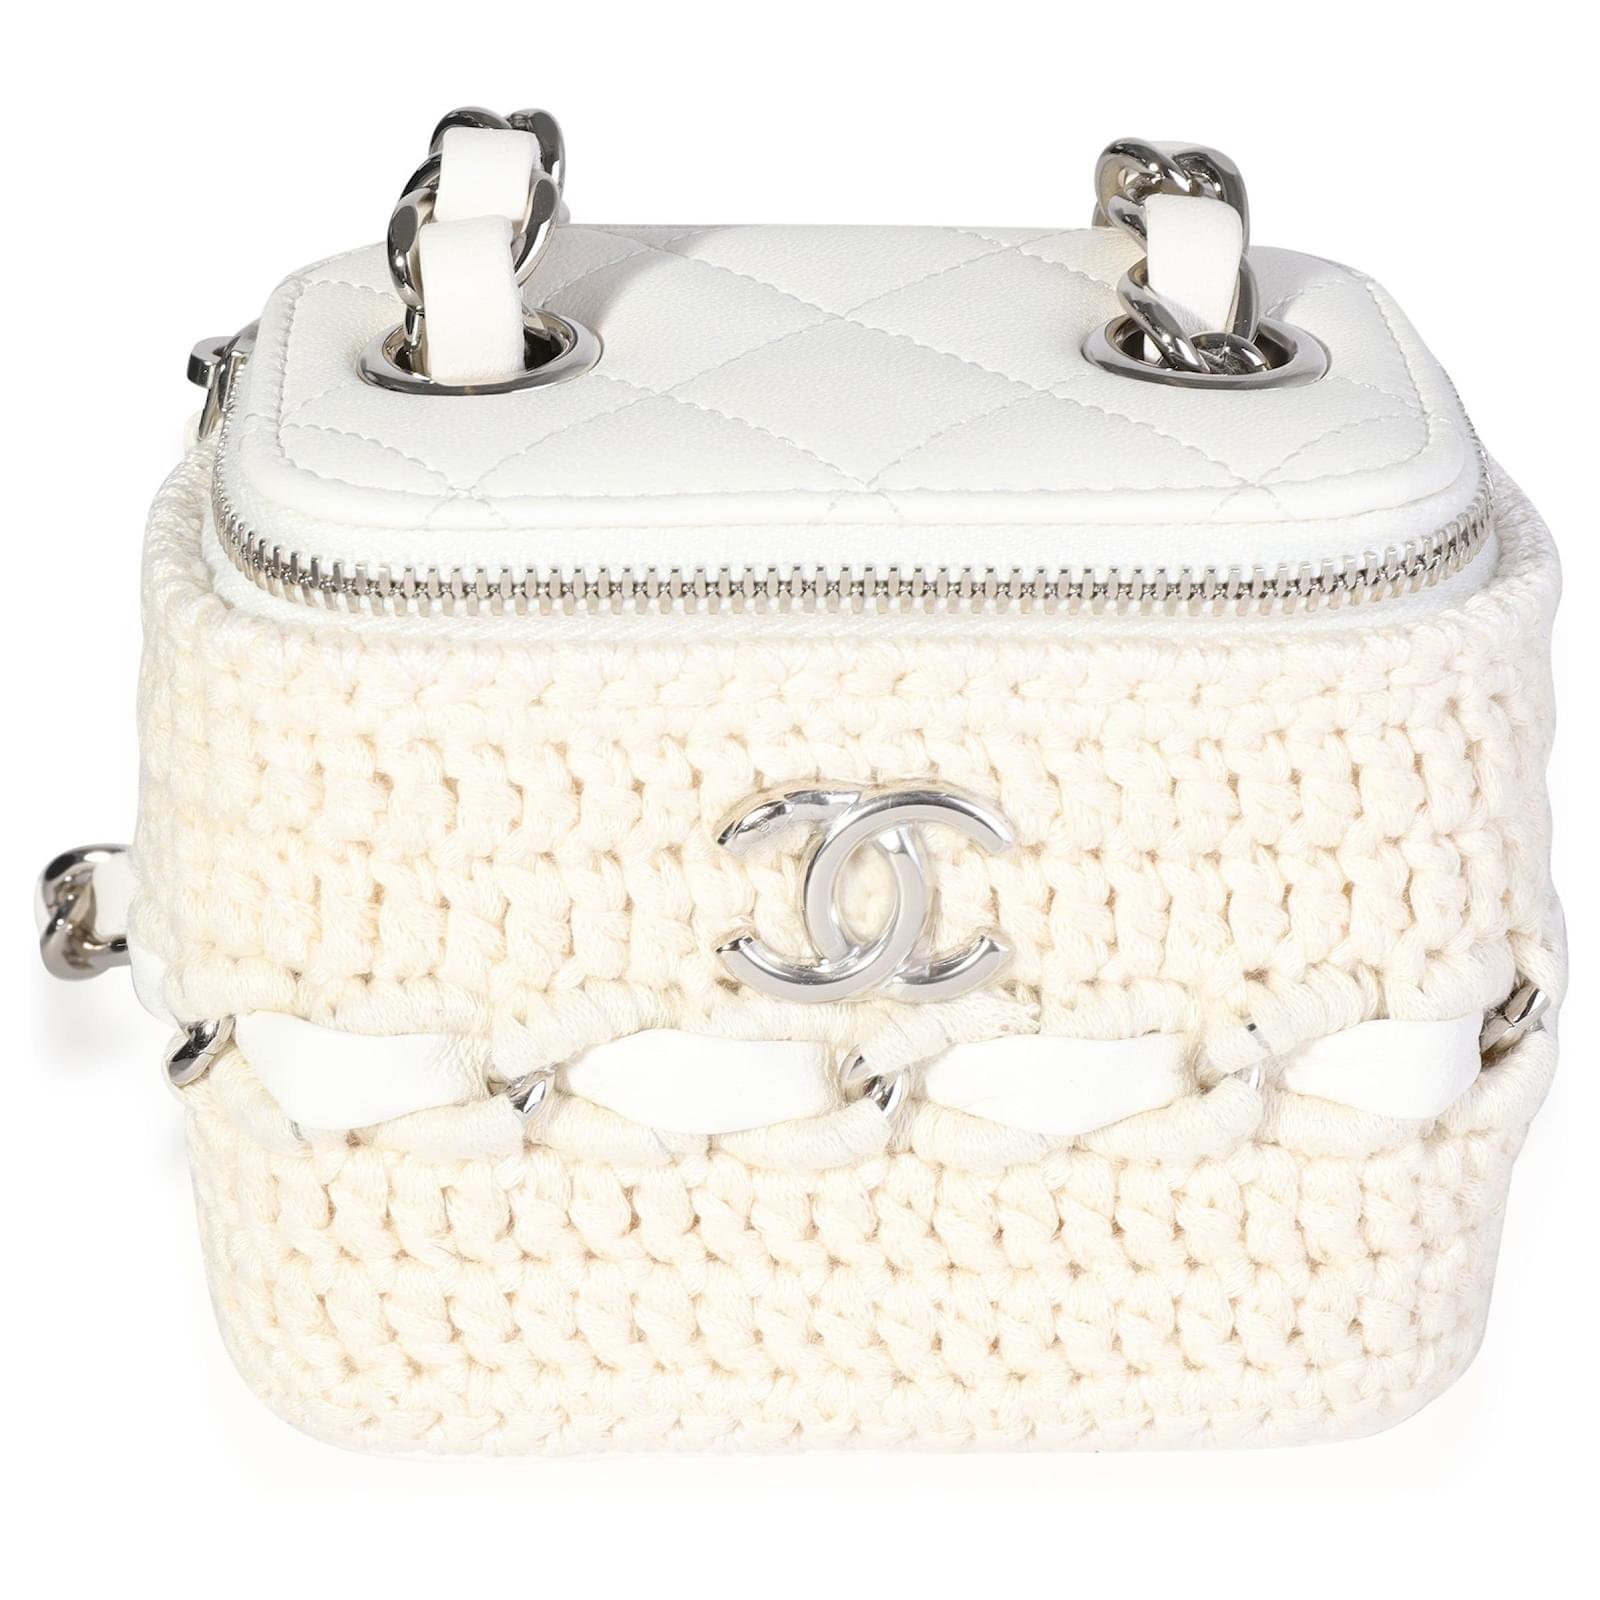 Chanel White Quilted Lambskin Micro Vanity Case Gold Hardware, 2022 (Very Good), Womens Handbag